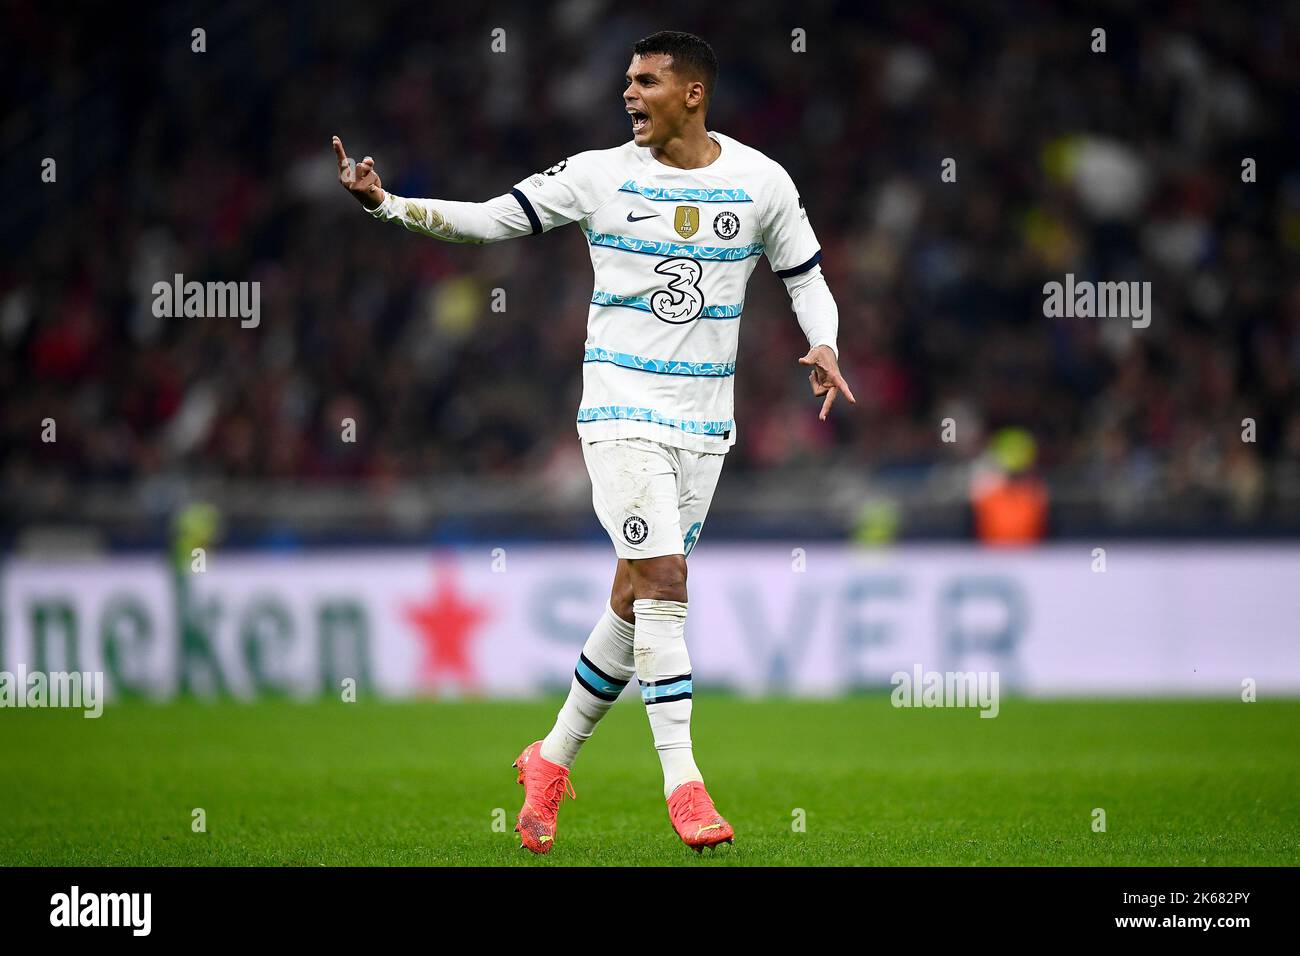 Milan, Italy. 11 October 2022. Thiago Silva of Chelsea FC reacts during the UEFA Champions League football match AC Milan and Chelsea FC. Credit: Nicolò Campo/Alamy Live News Stock Photo